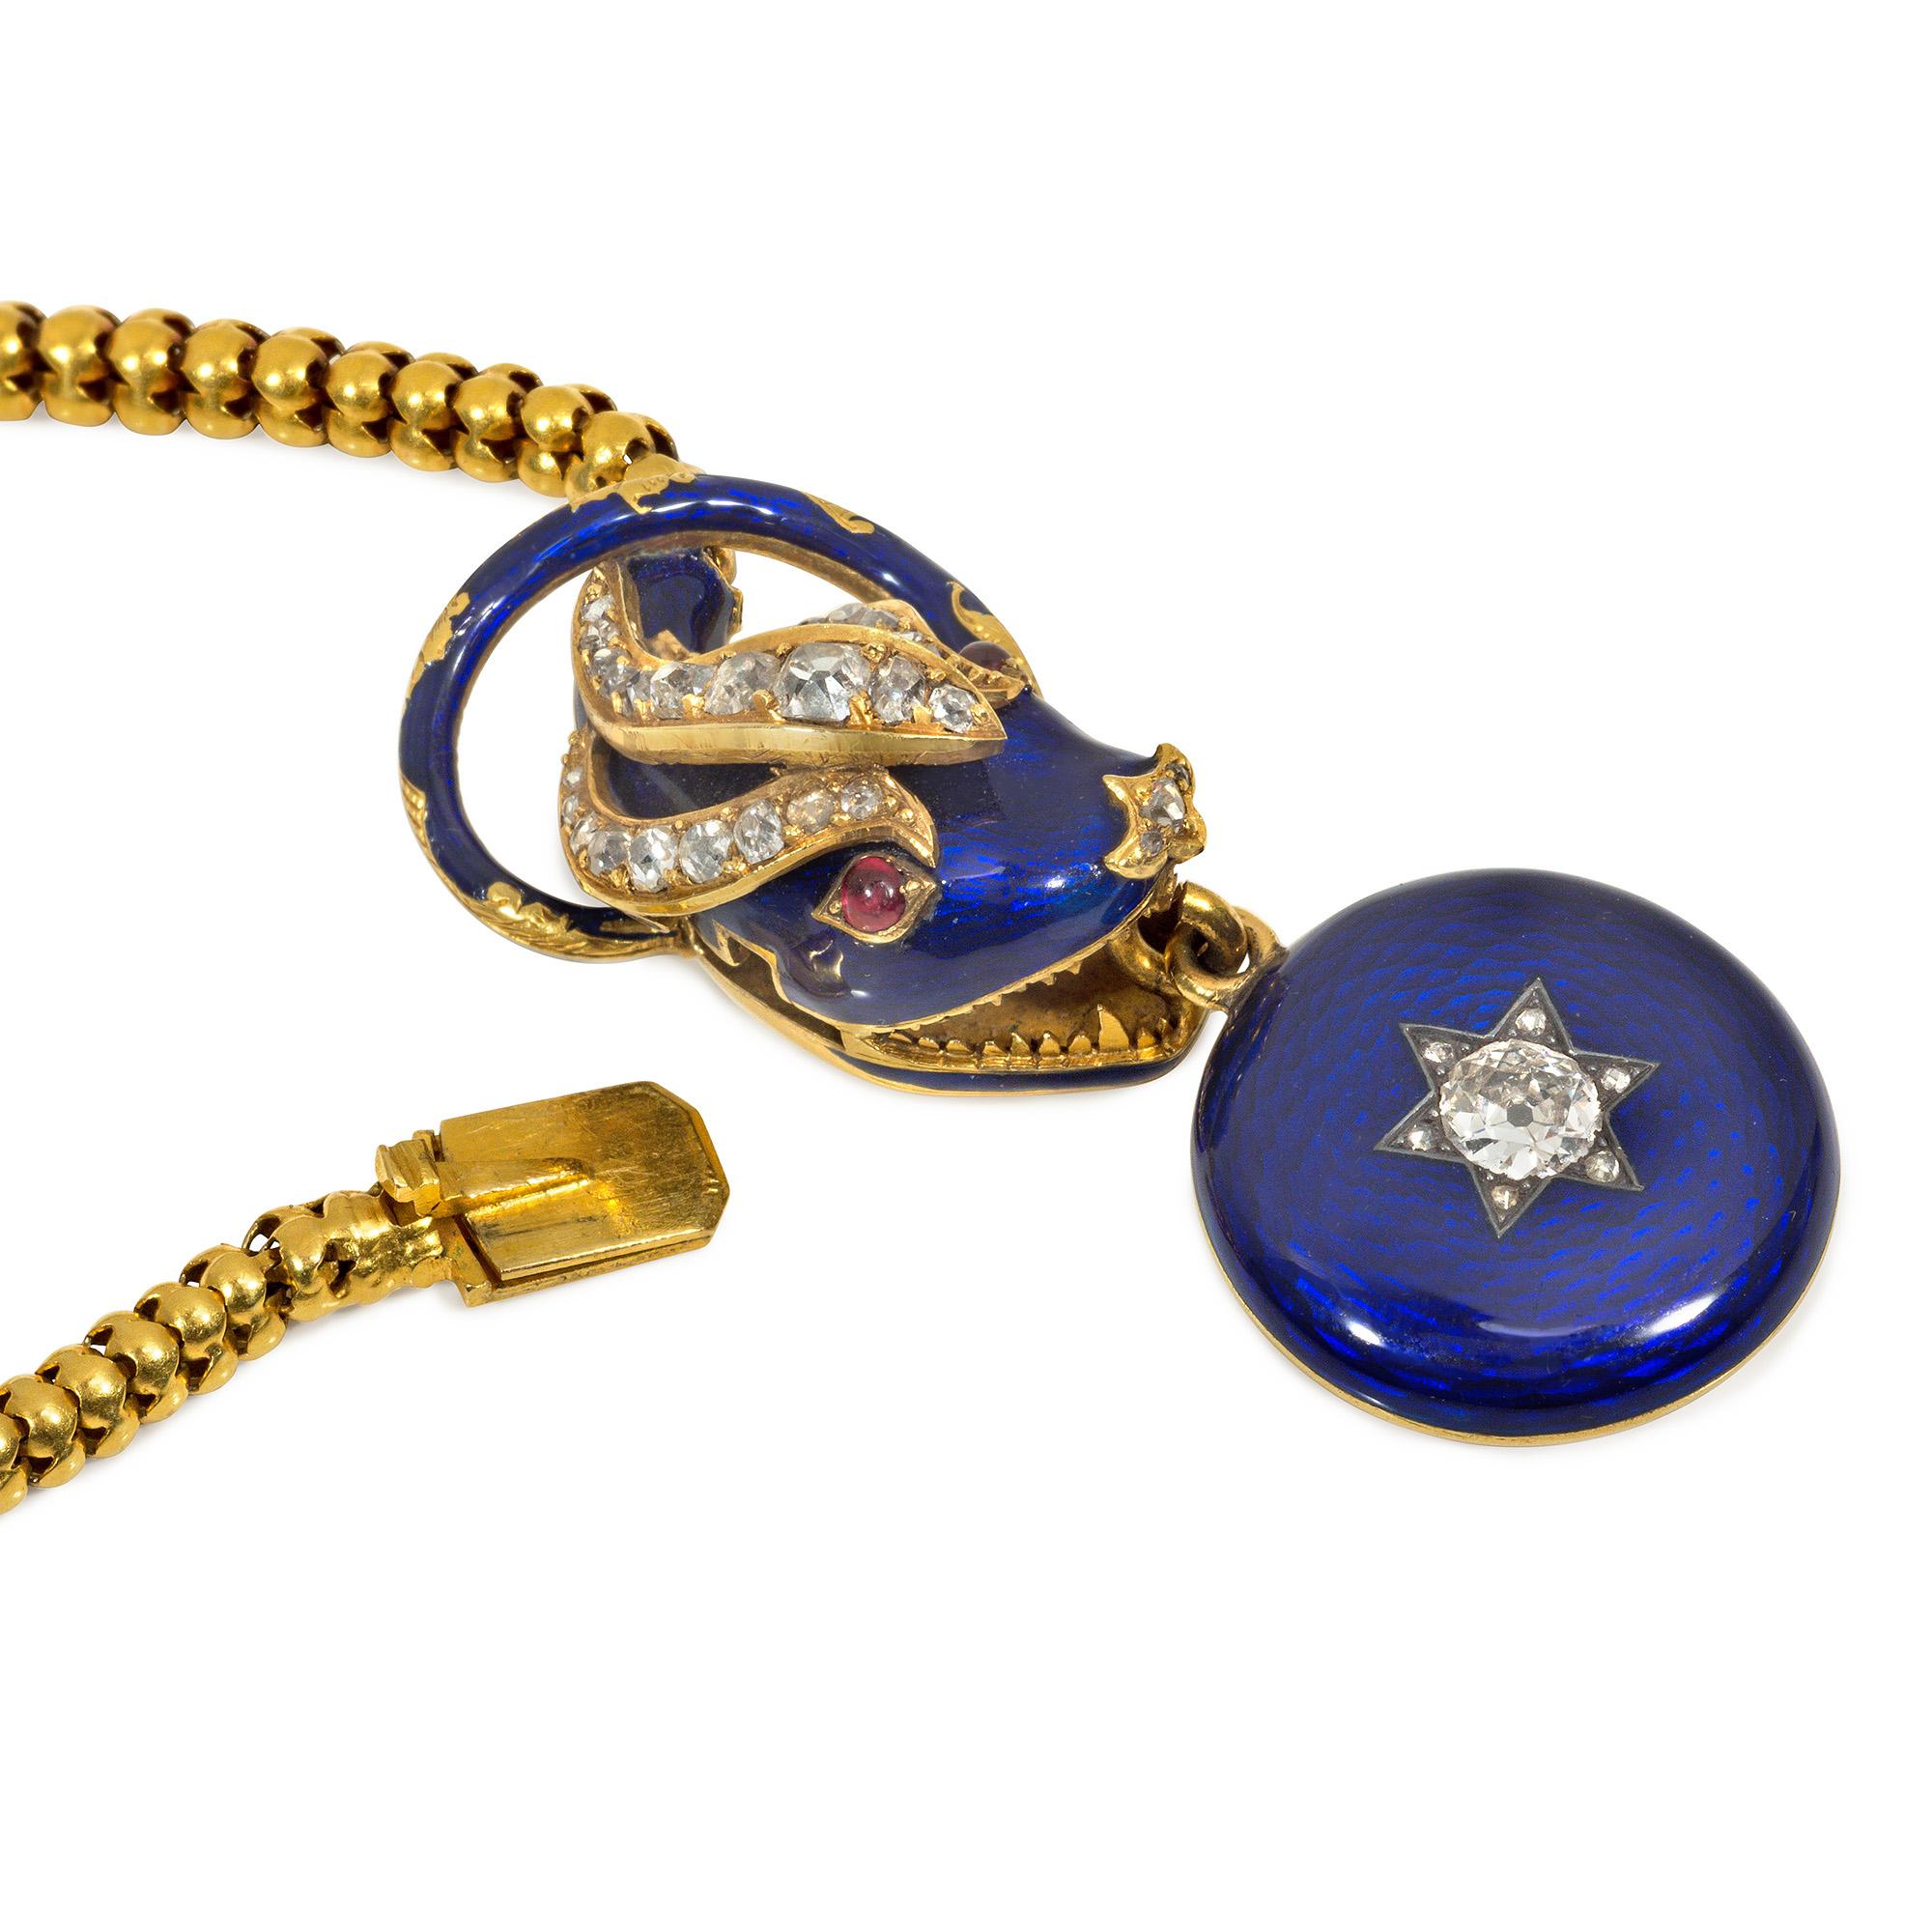 Early Victorian Antique Victorian Gold, Blue Enamel, and Gemstone Snake Necklace with Locket For Sale